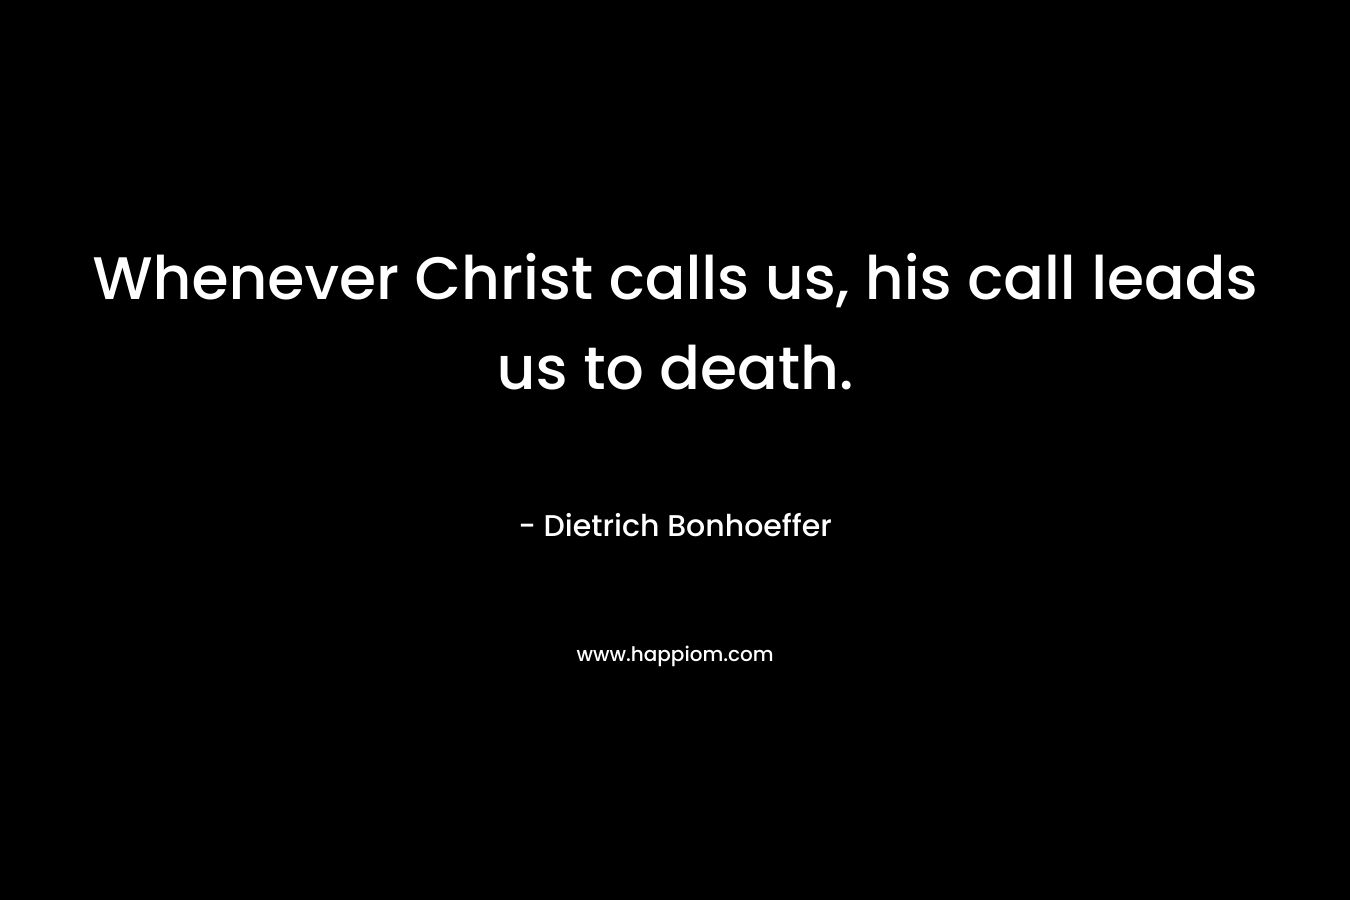 Whenever Christ calls us, his call leads us to death.